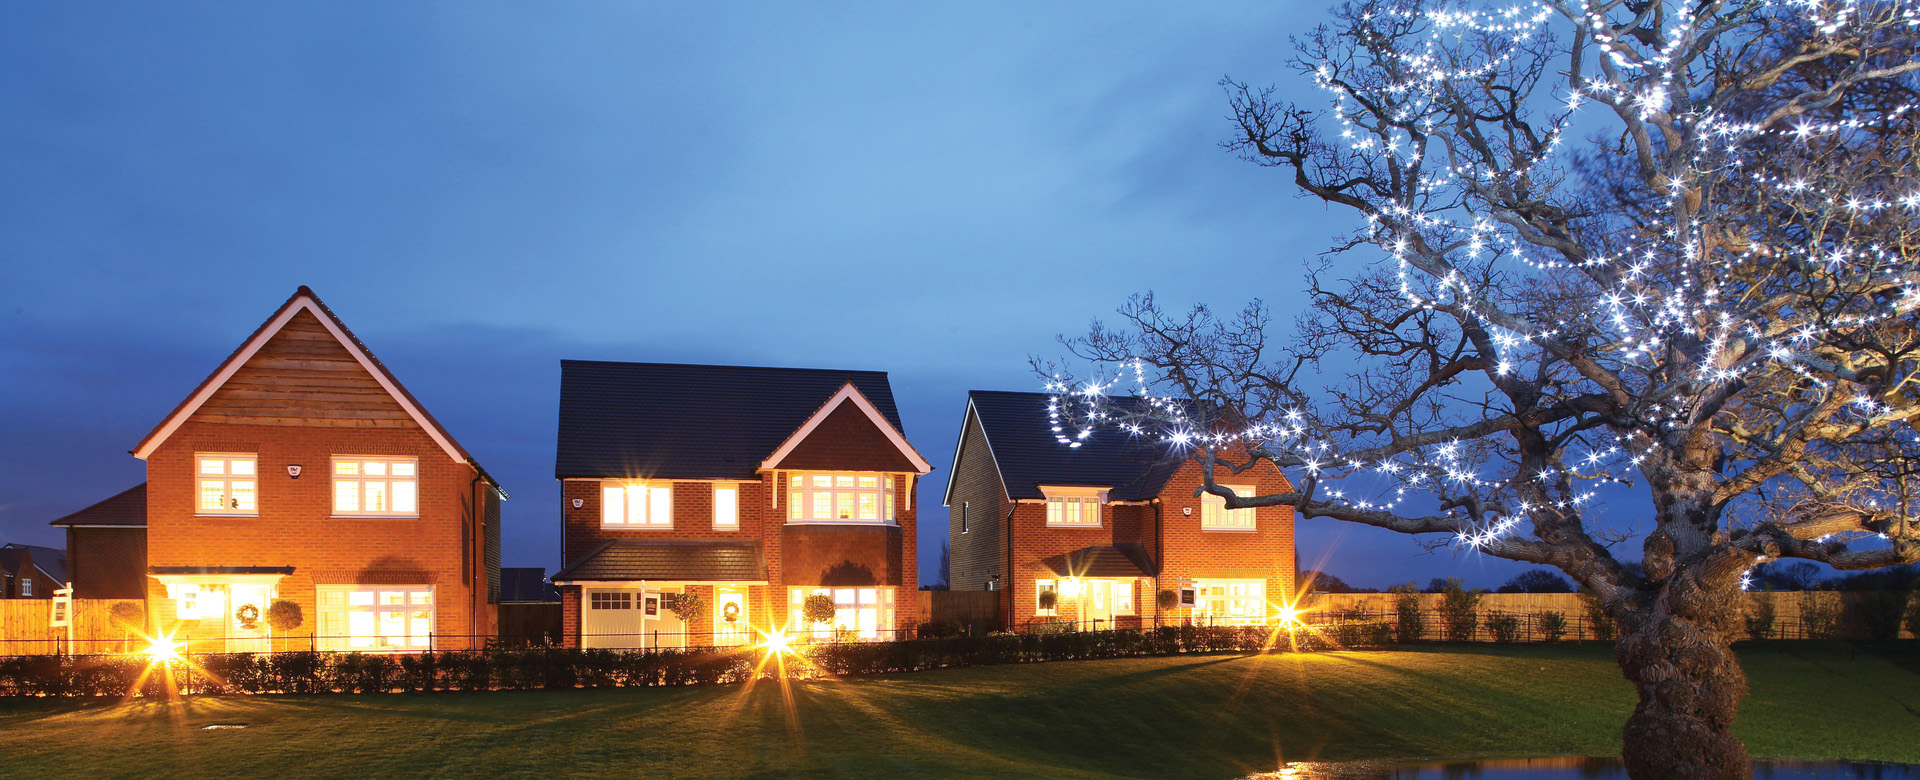 1-redrow-development-at-christmas-new-build-homes-heritage-collection